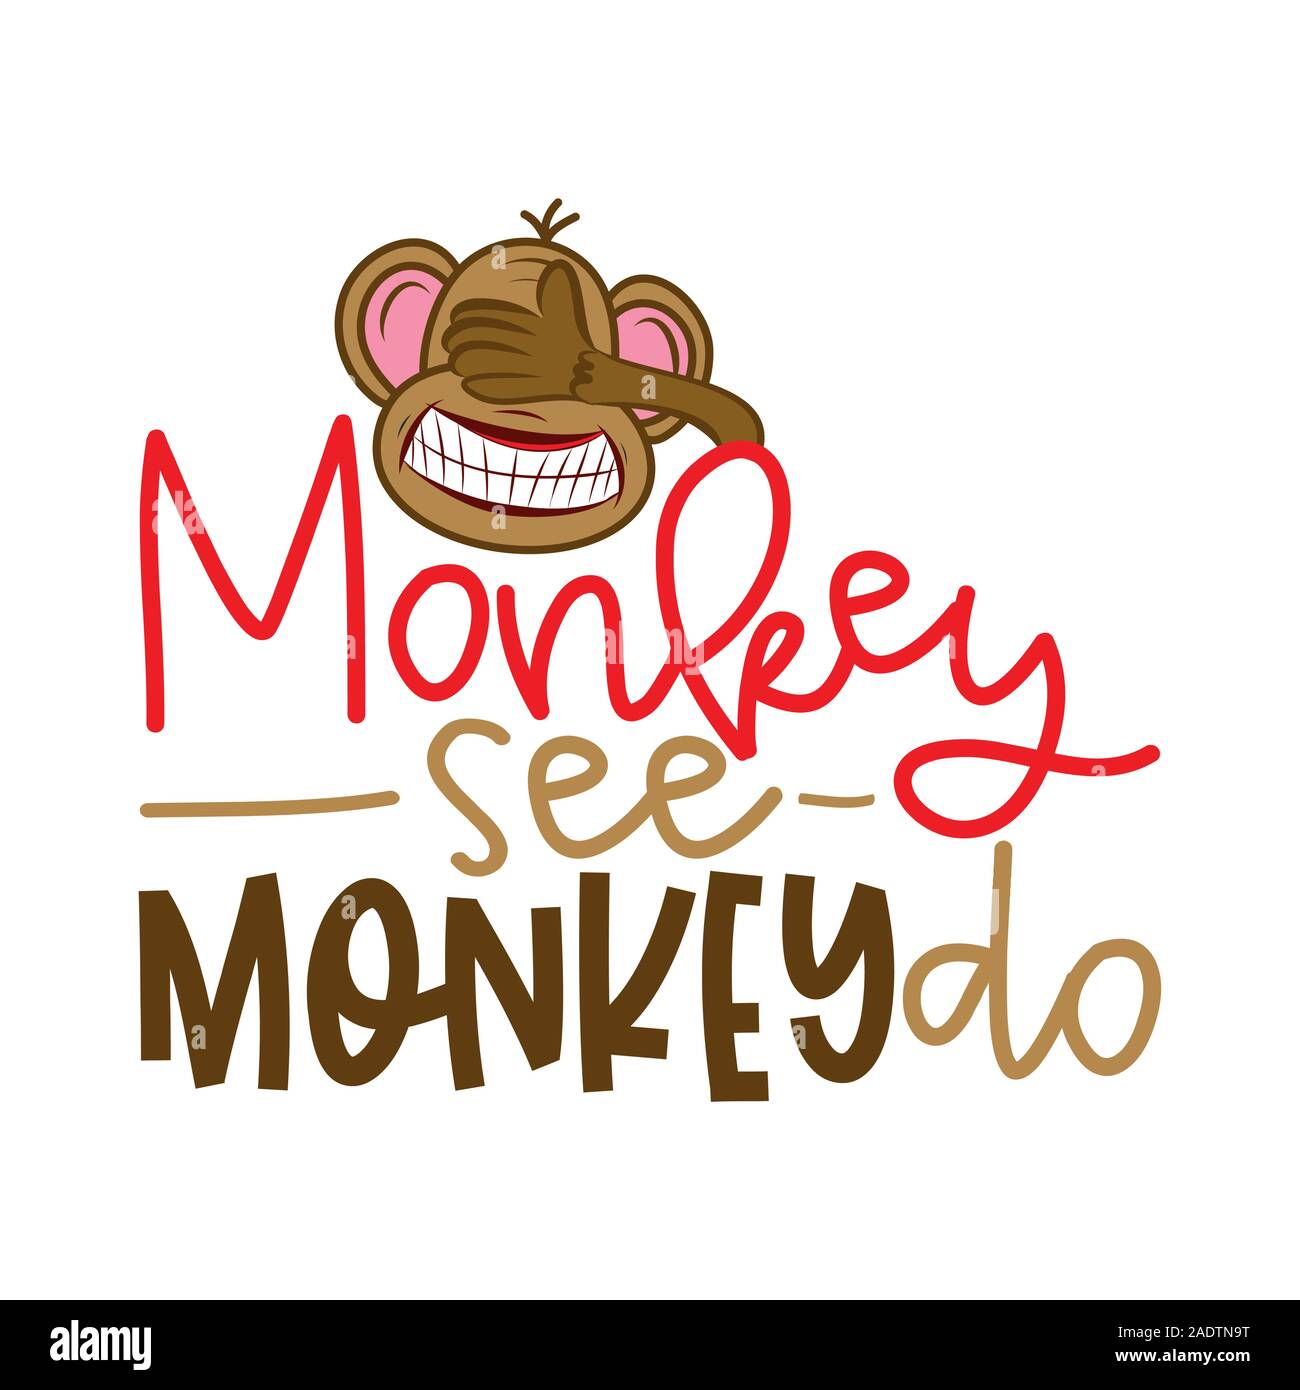 Monkey see monkey do - funny lettering with crazy blind monkey. Handmade calligraphy vector illustration. Good for t shirts, mug, scrap booking, poste Stock Vector